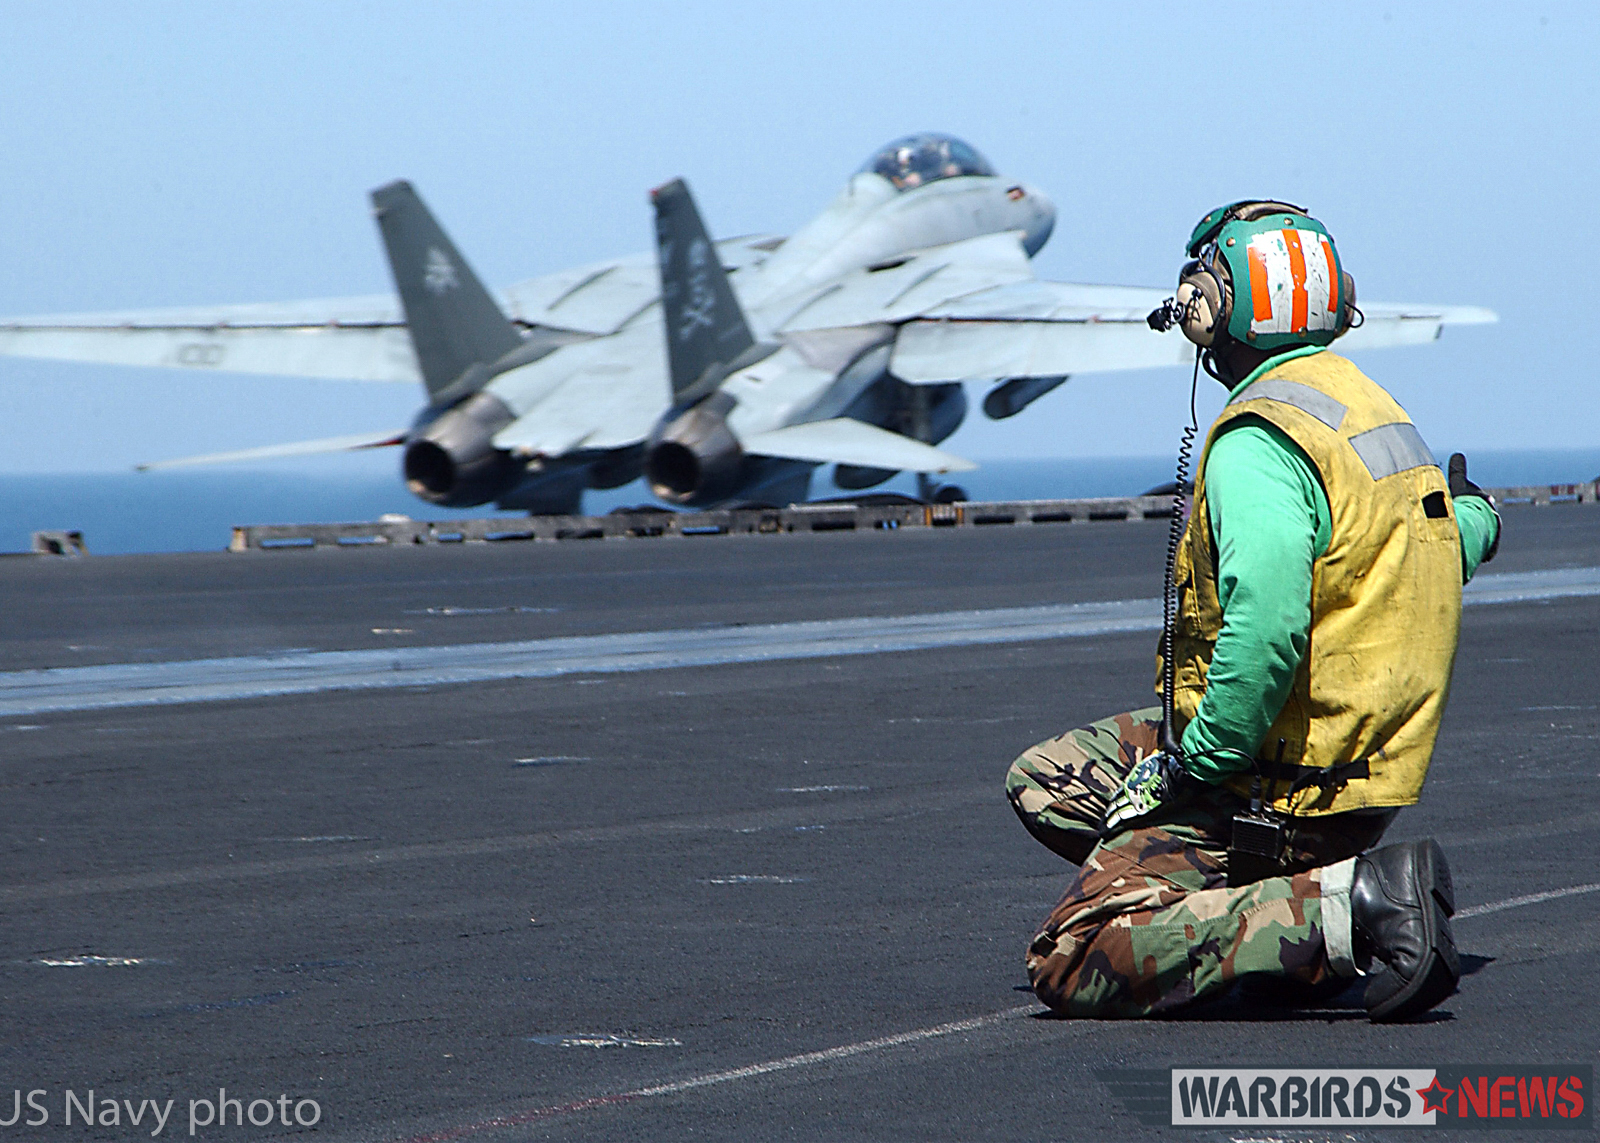 At sea aboard USS George Washington (CVN 73) Sep. 8, 2002 -- Aviation Boatswain's Mate 2nd Class Michael Keys from Orlando, Fla., watches an F-14 "Tomcat," assigned to the "Jolly Rogers" of Fighter Squadron One Zero Three (VF-103) gain altitude after launch. Washington is homeported in Norfolk, Va., and is on a six-month deployment conducting combat missions in support of Operation Southern Watch. U.S. Navy photo by Photographer's Mate Airman Jessica Davis. (RELEASED)